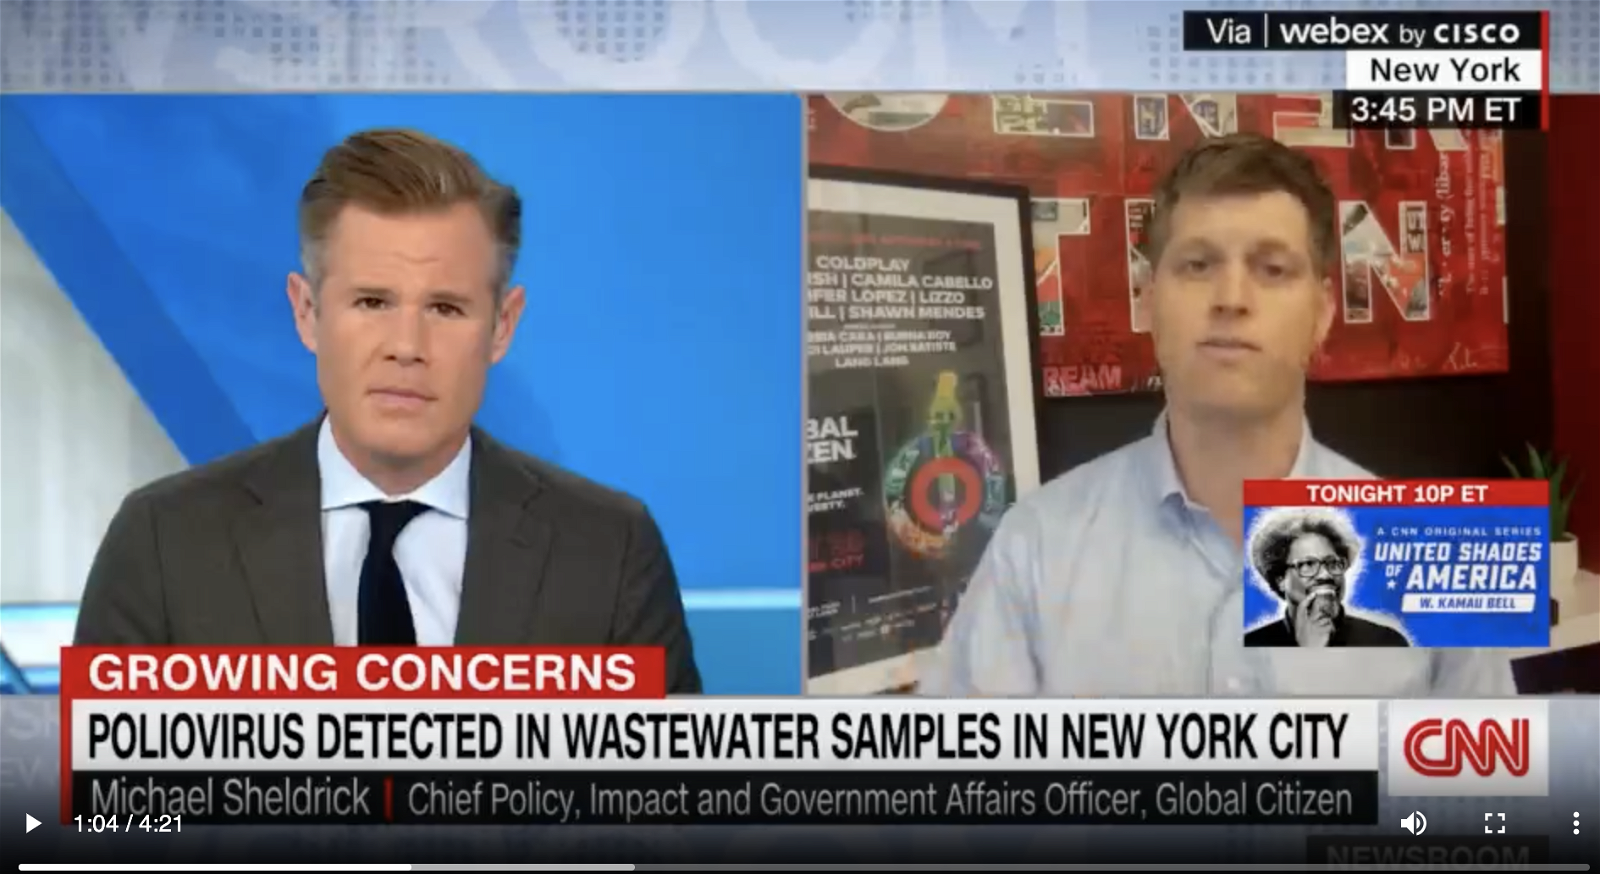 CNN Interview with Alexander Marquardt on the New York polio outbreak and the urgent need to fund polio eradication